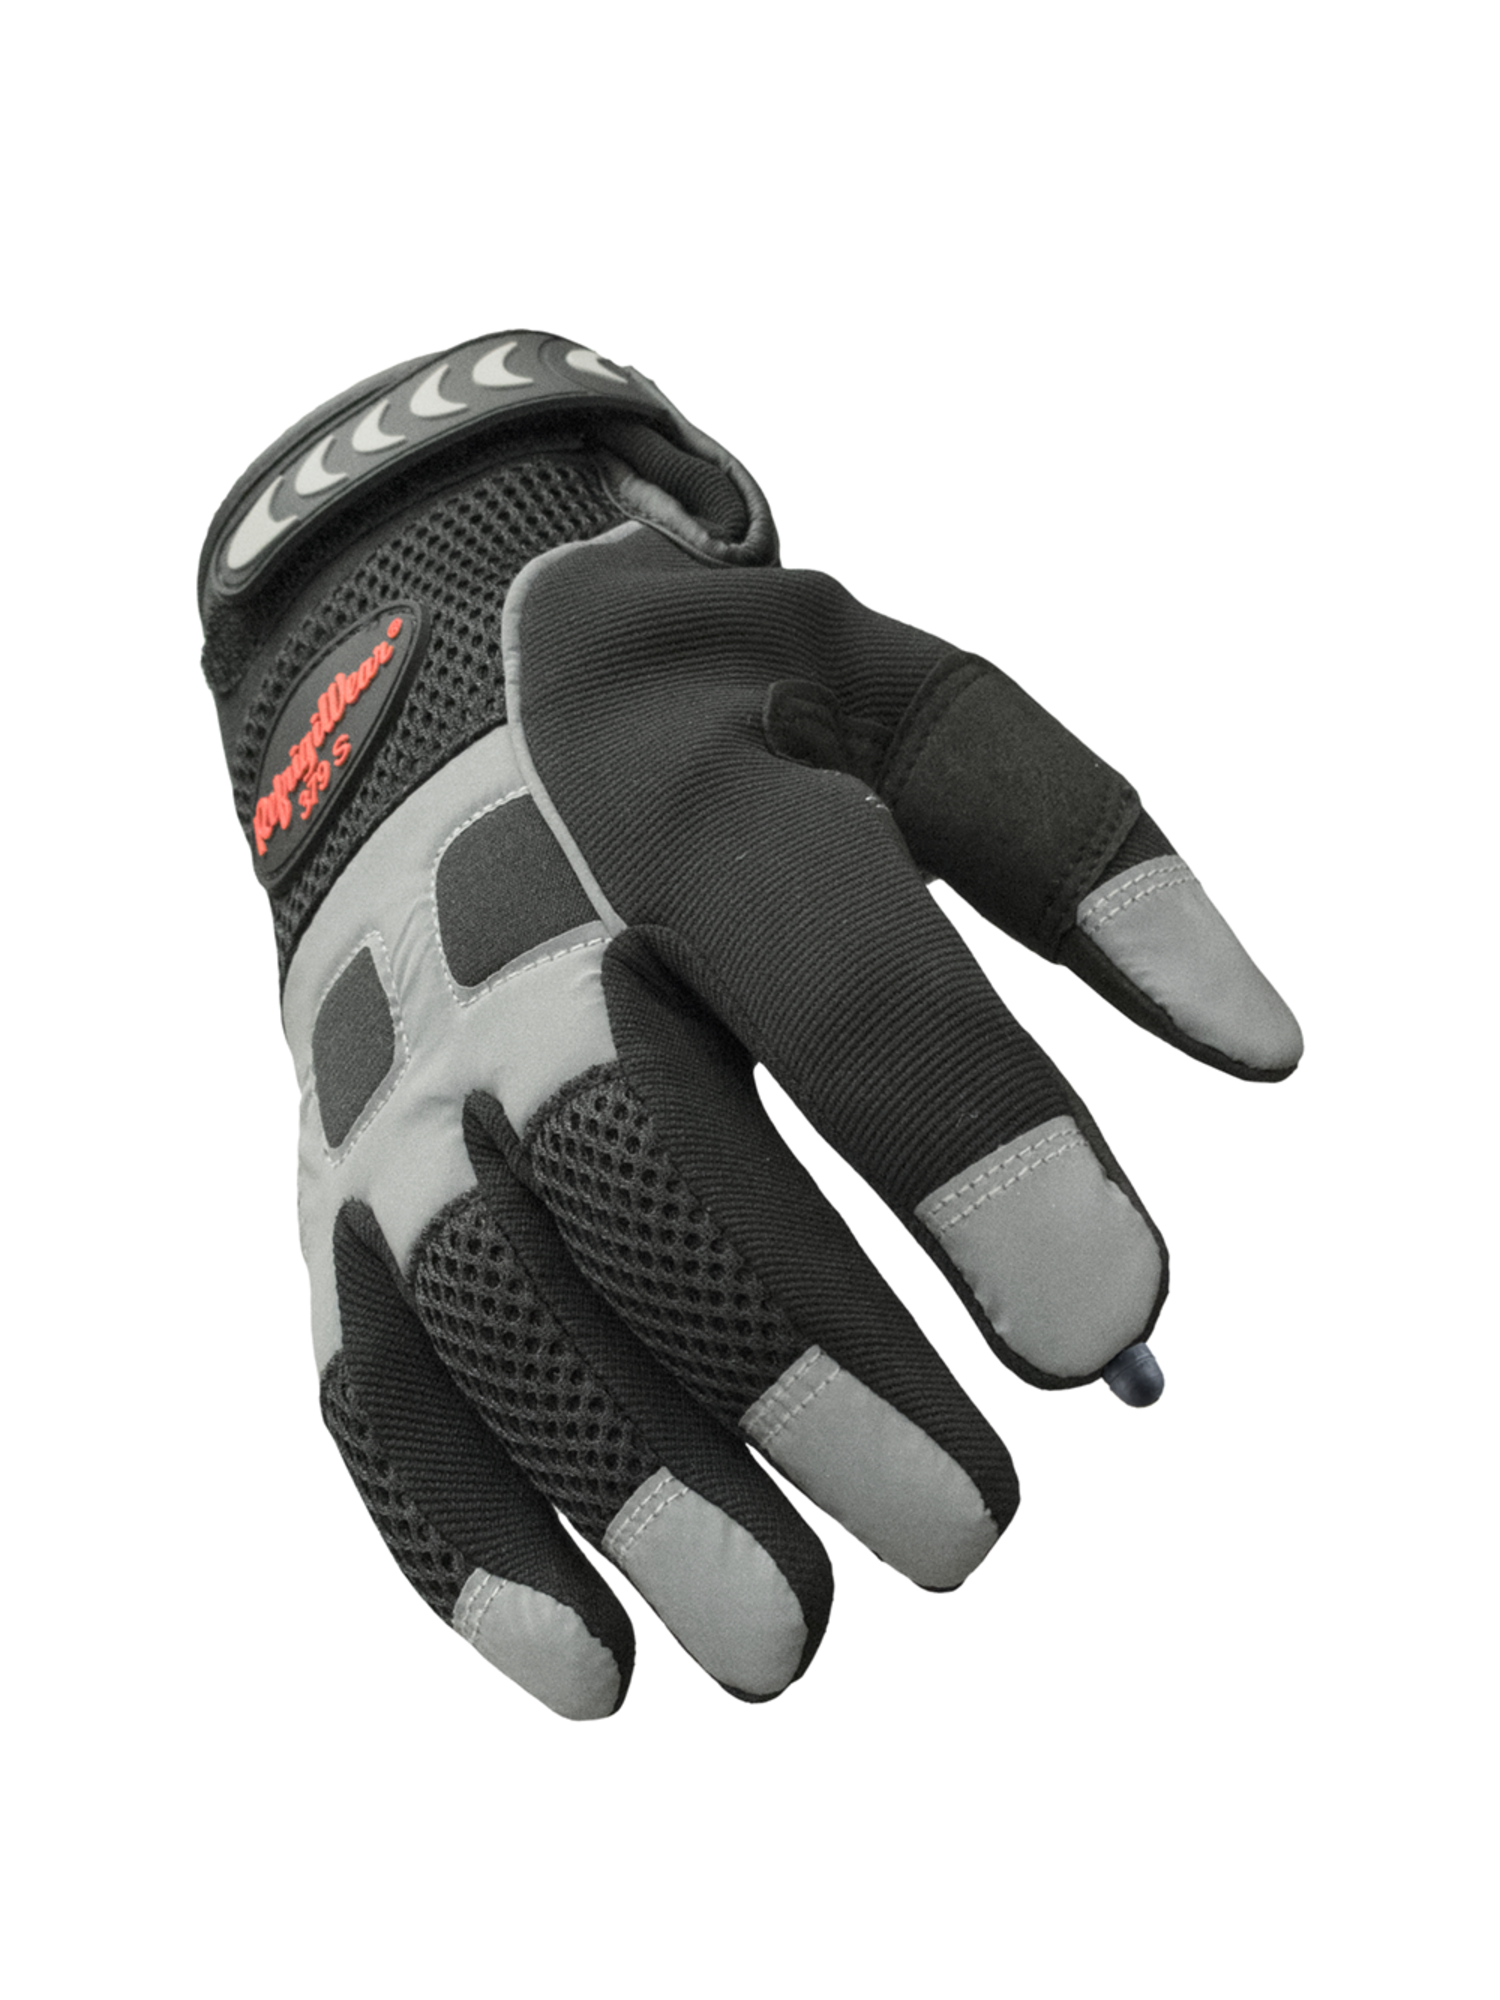 RefrigiWear Insulated HiVis Super Grip Glove with Key-Rite Nib | Black | Ragg Wool/Synthetic/Leather | M